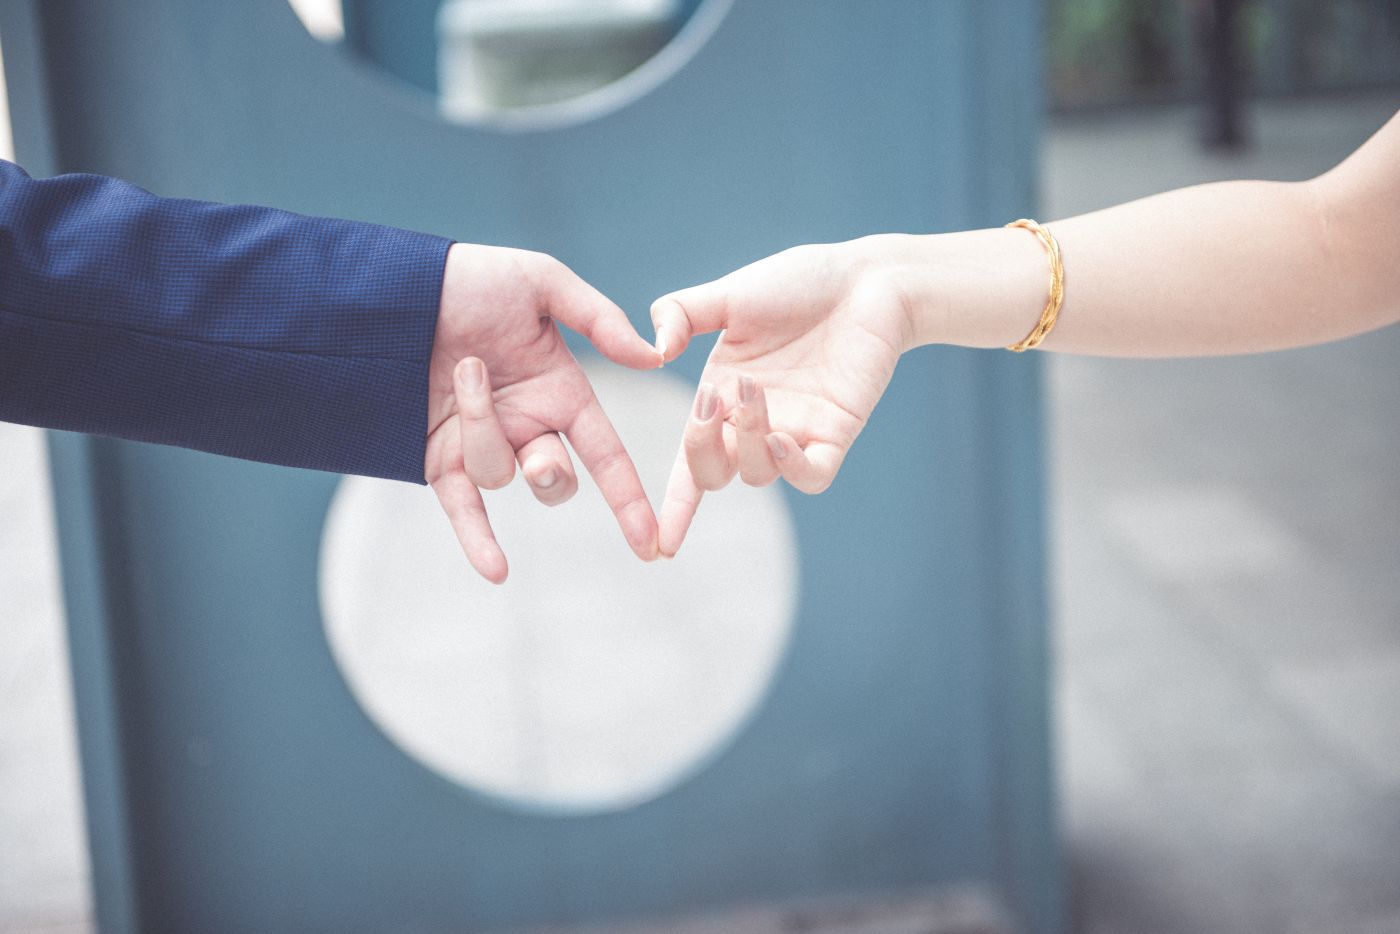 Couple making a heart with their hands